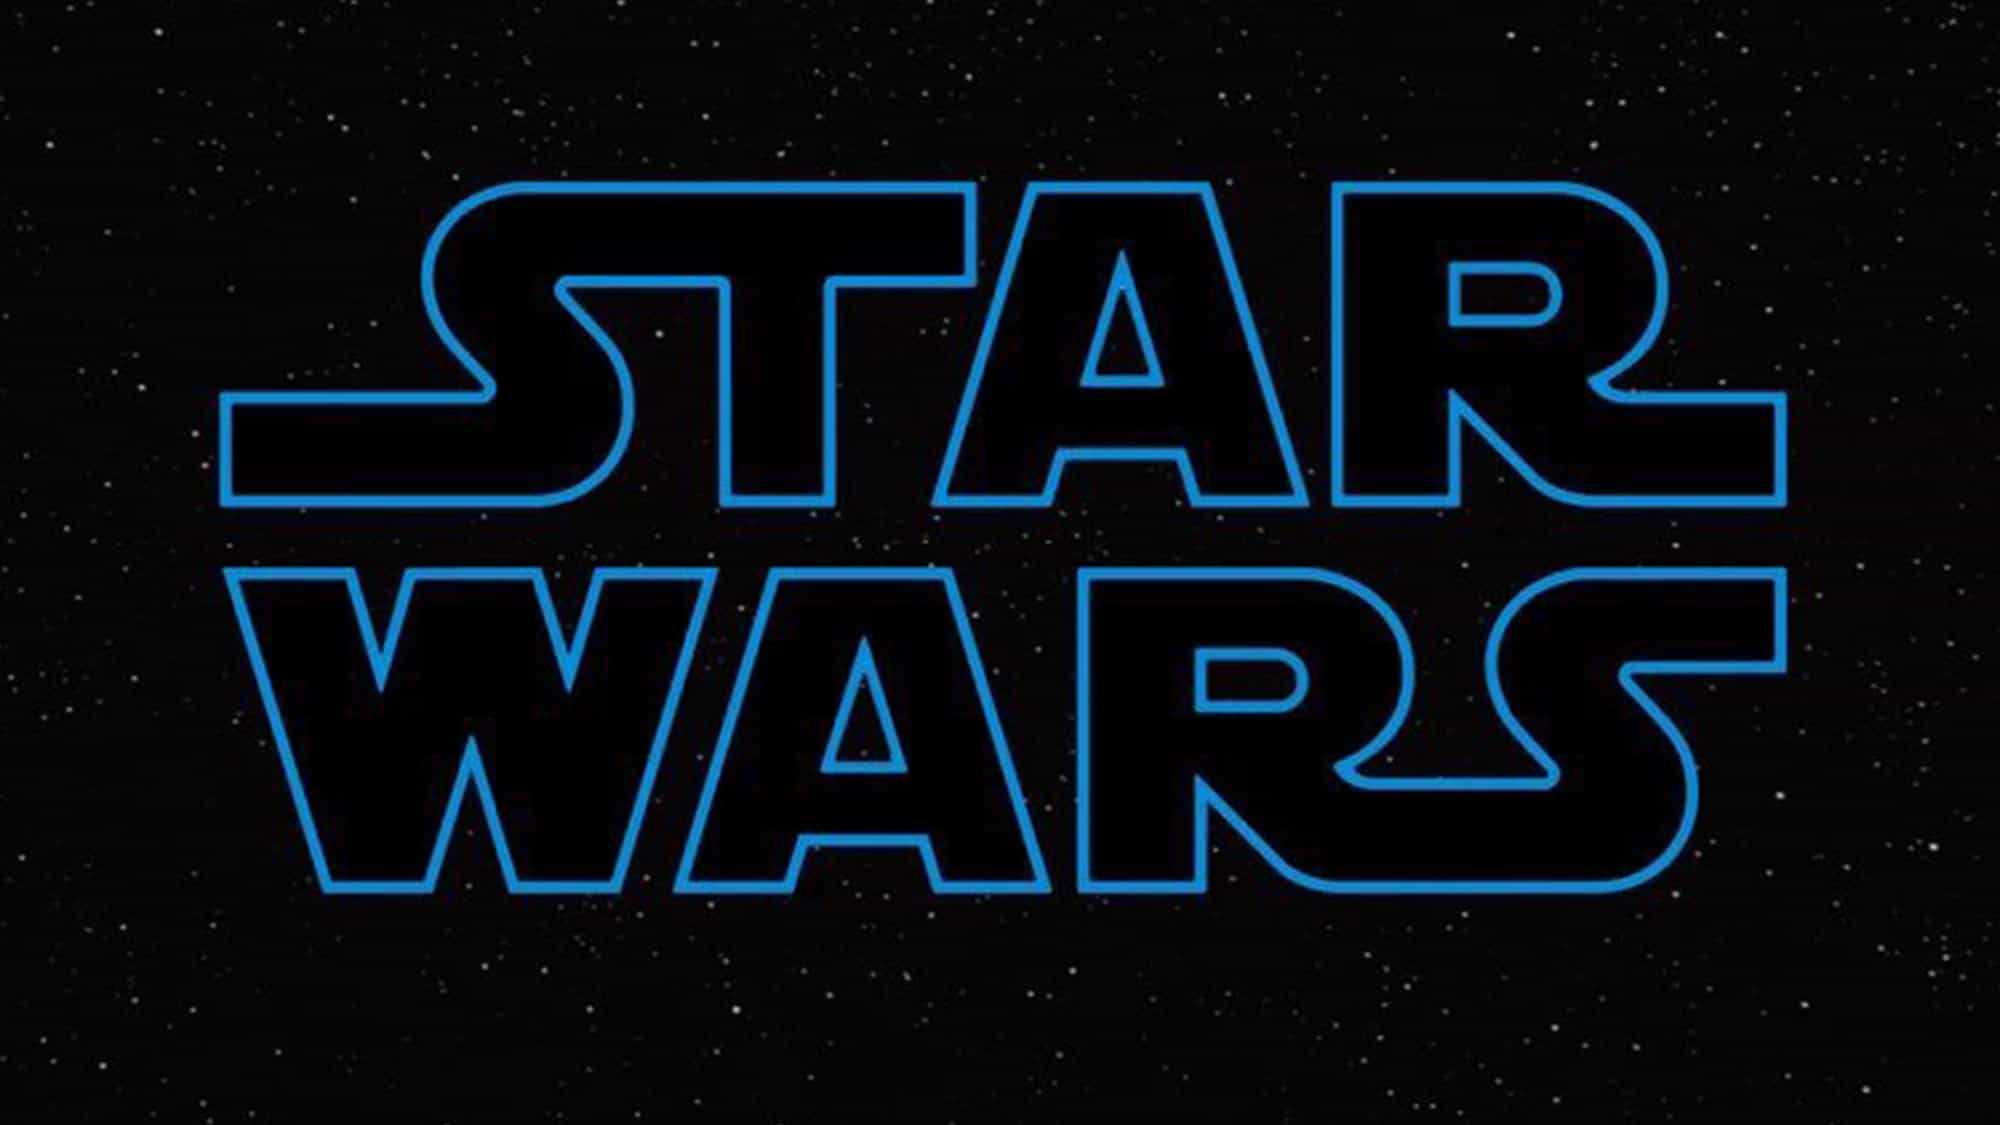 Three new Star Wars Universe movies get announced at Star Wars Celebration covering the full timeline of Star Wars